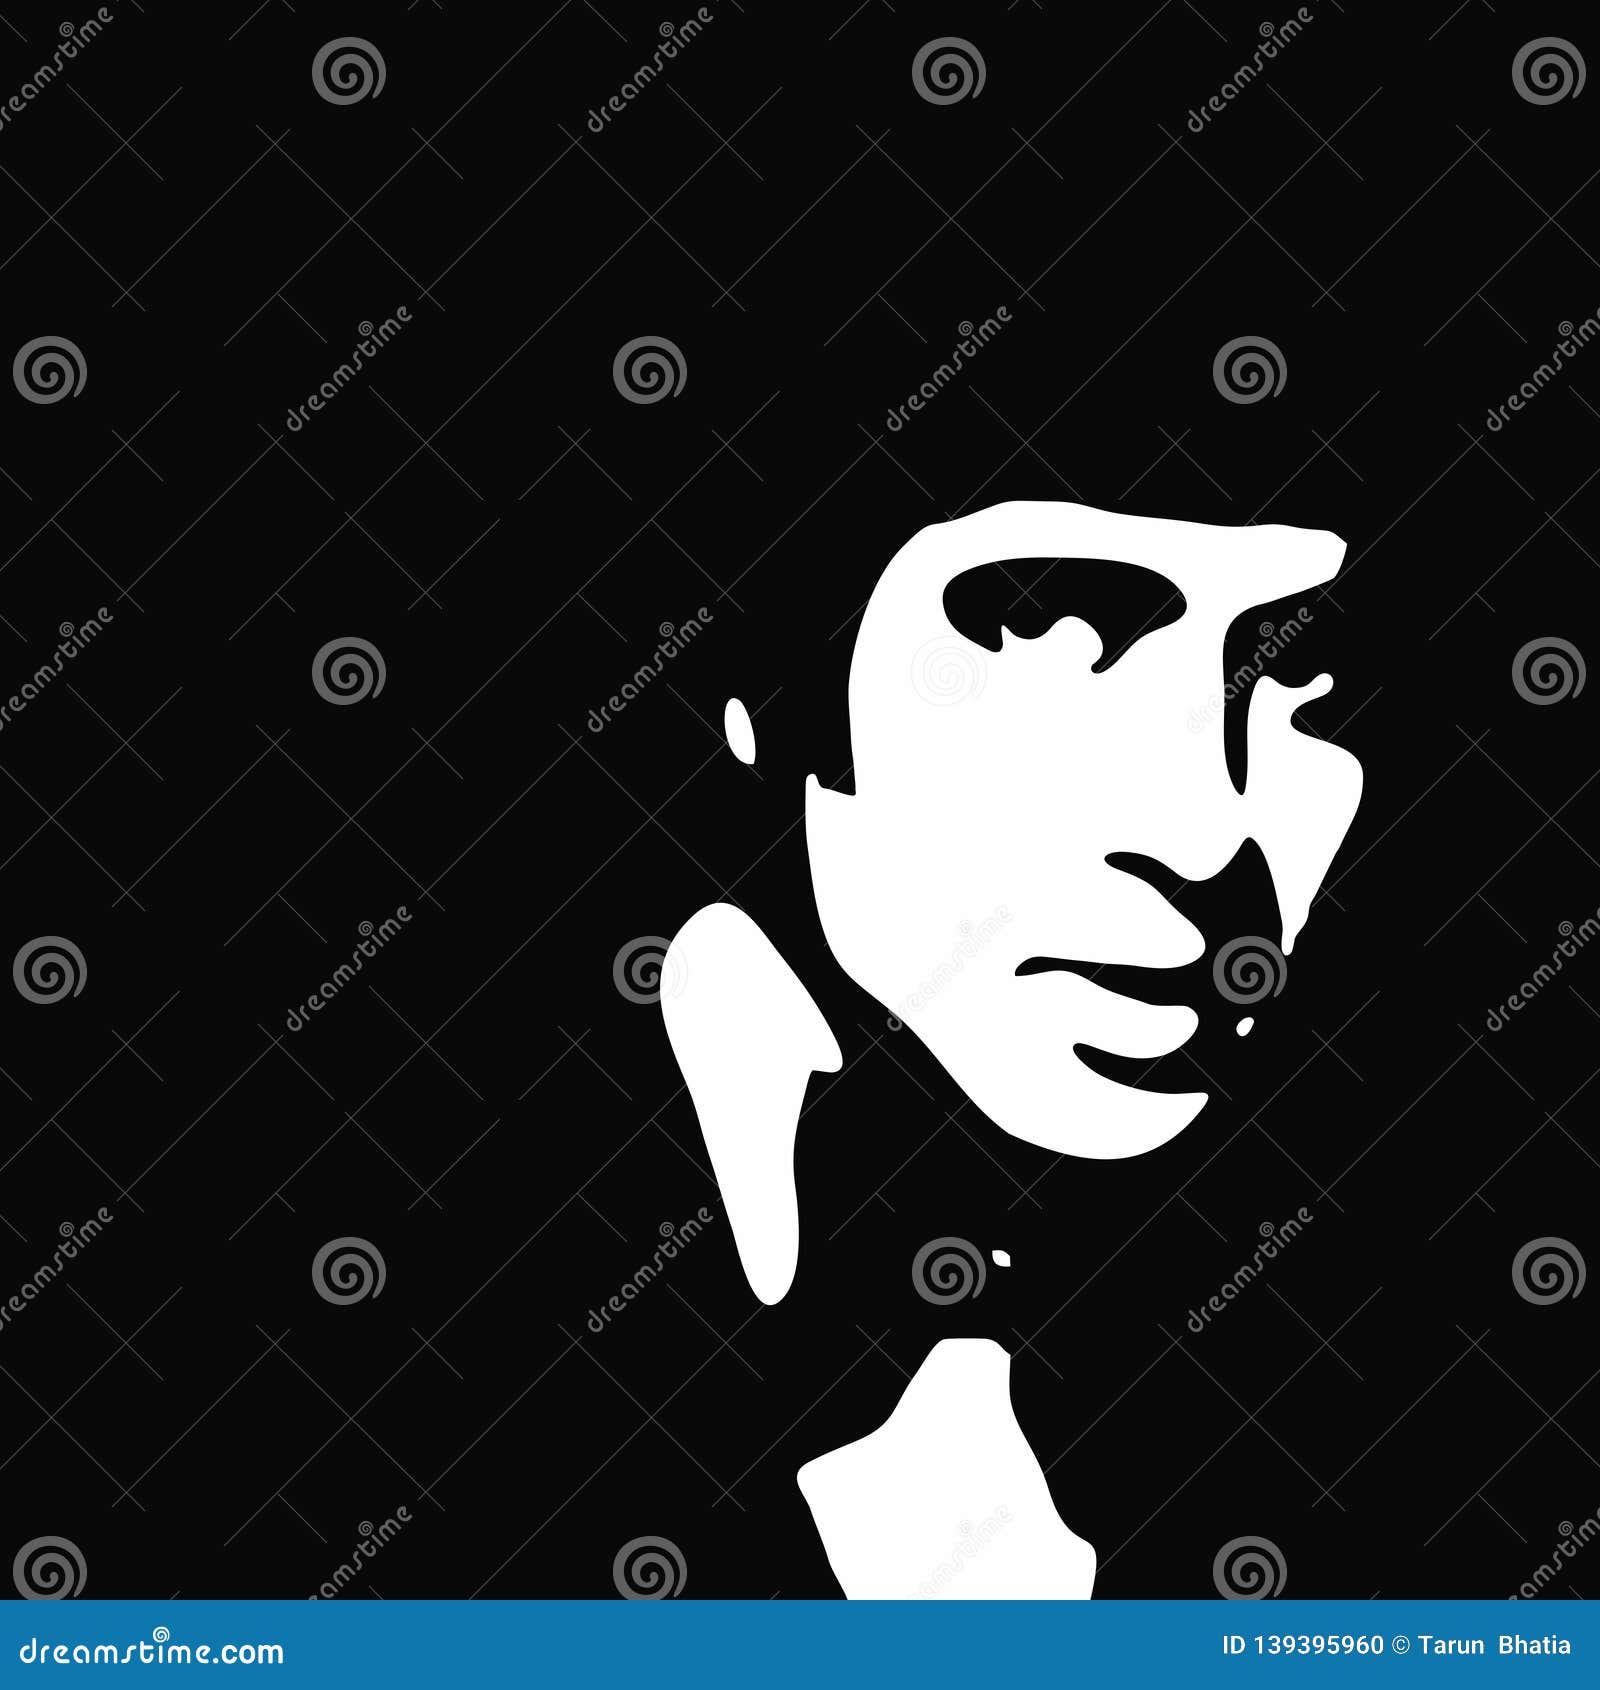 Indian Flim Star Amitabh Bachchan, with PNG Format. Stock Photo -  Illustration of bollywood, silhouette: 139395960